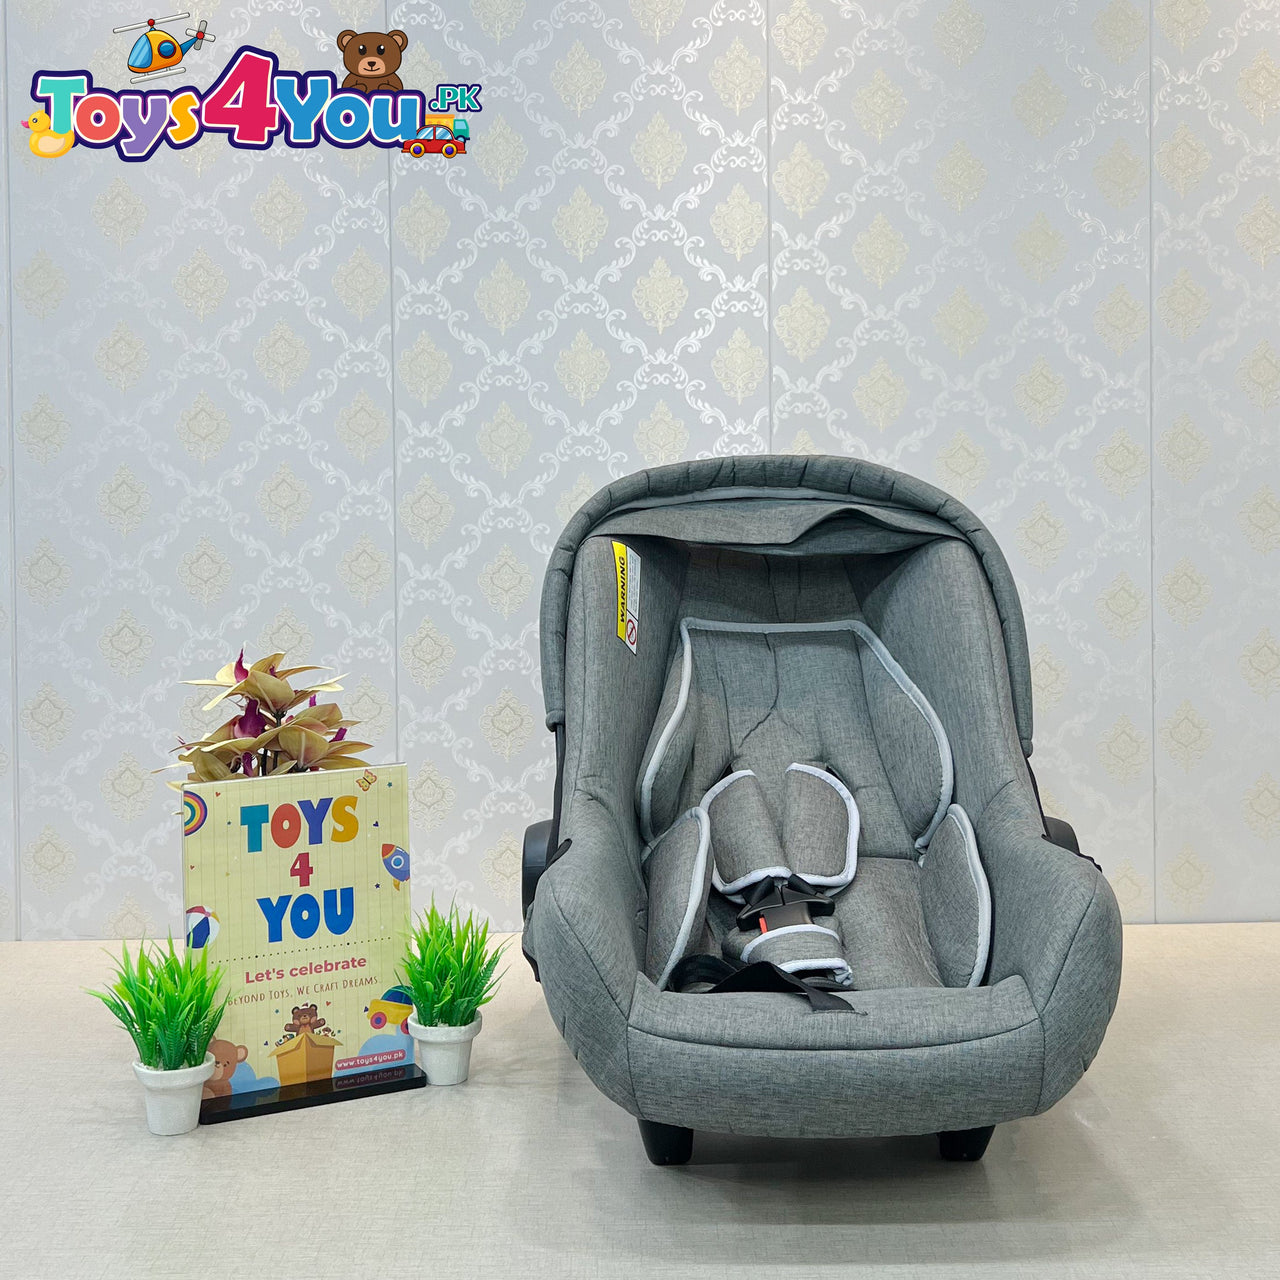 2 IN 1 BABY CARRY COT & CAR SEAT WITH ROOF